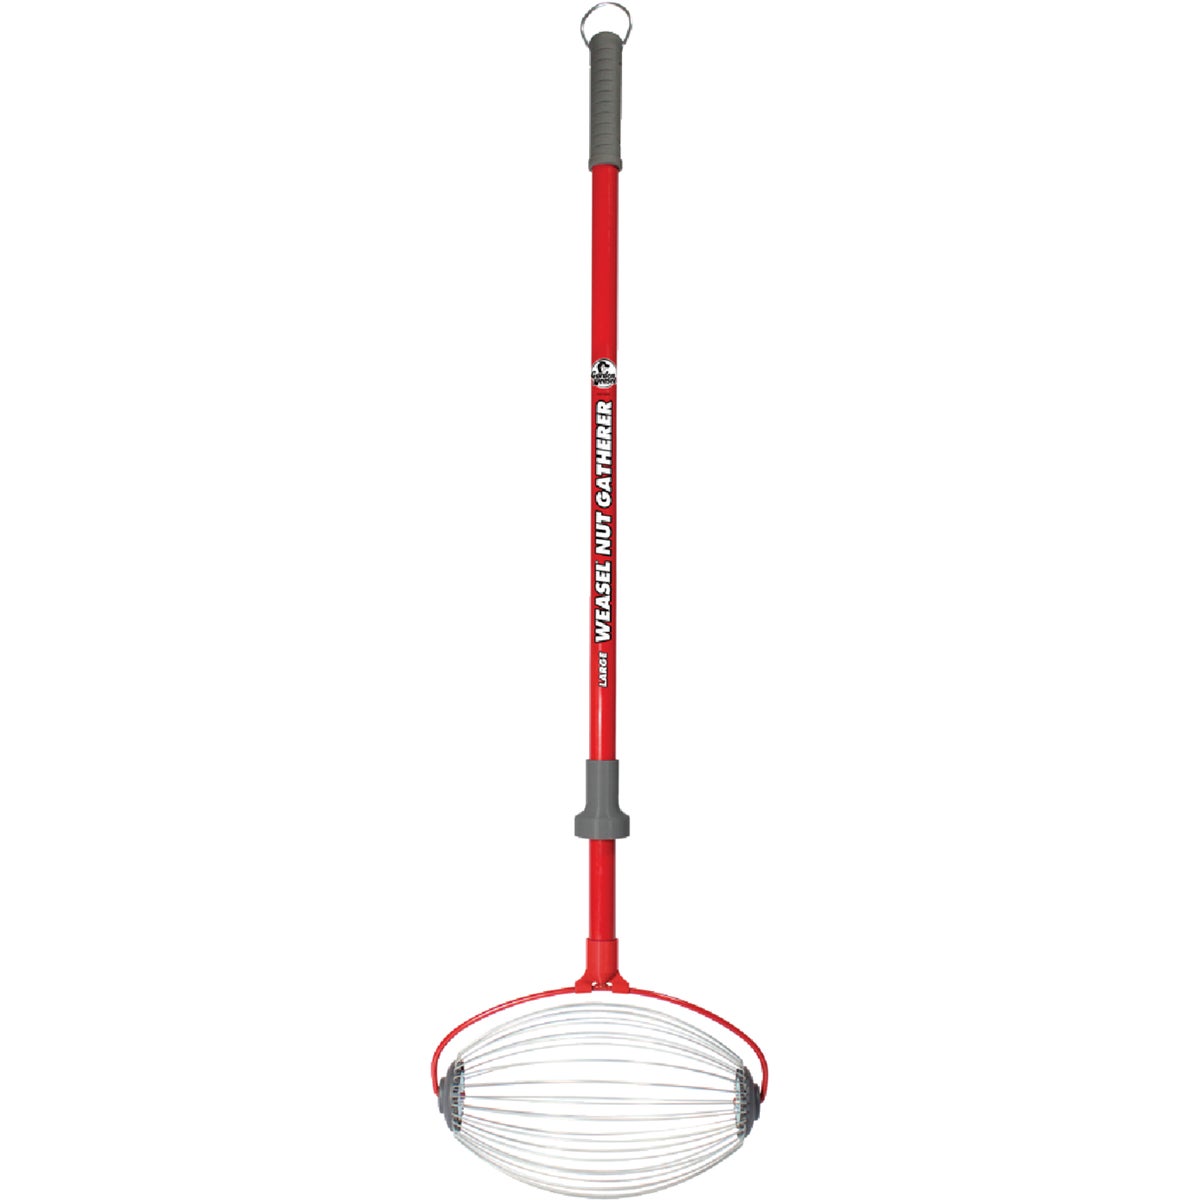 Item 700682, The large capacity nut gathering tool has an extra large durable steel wire